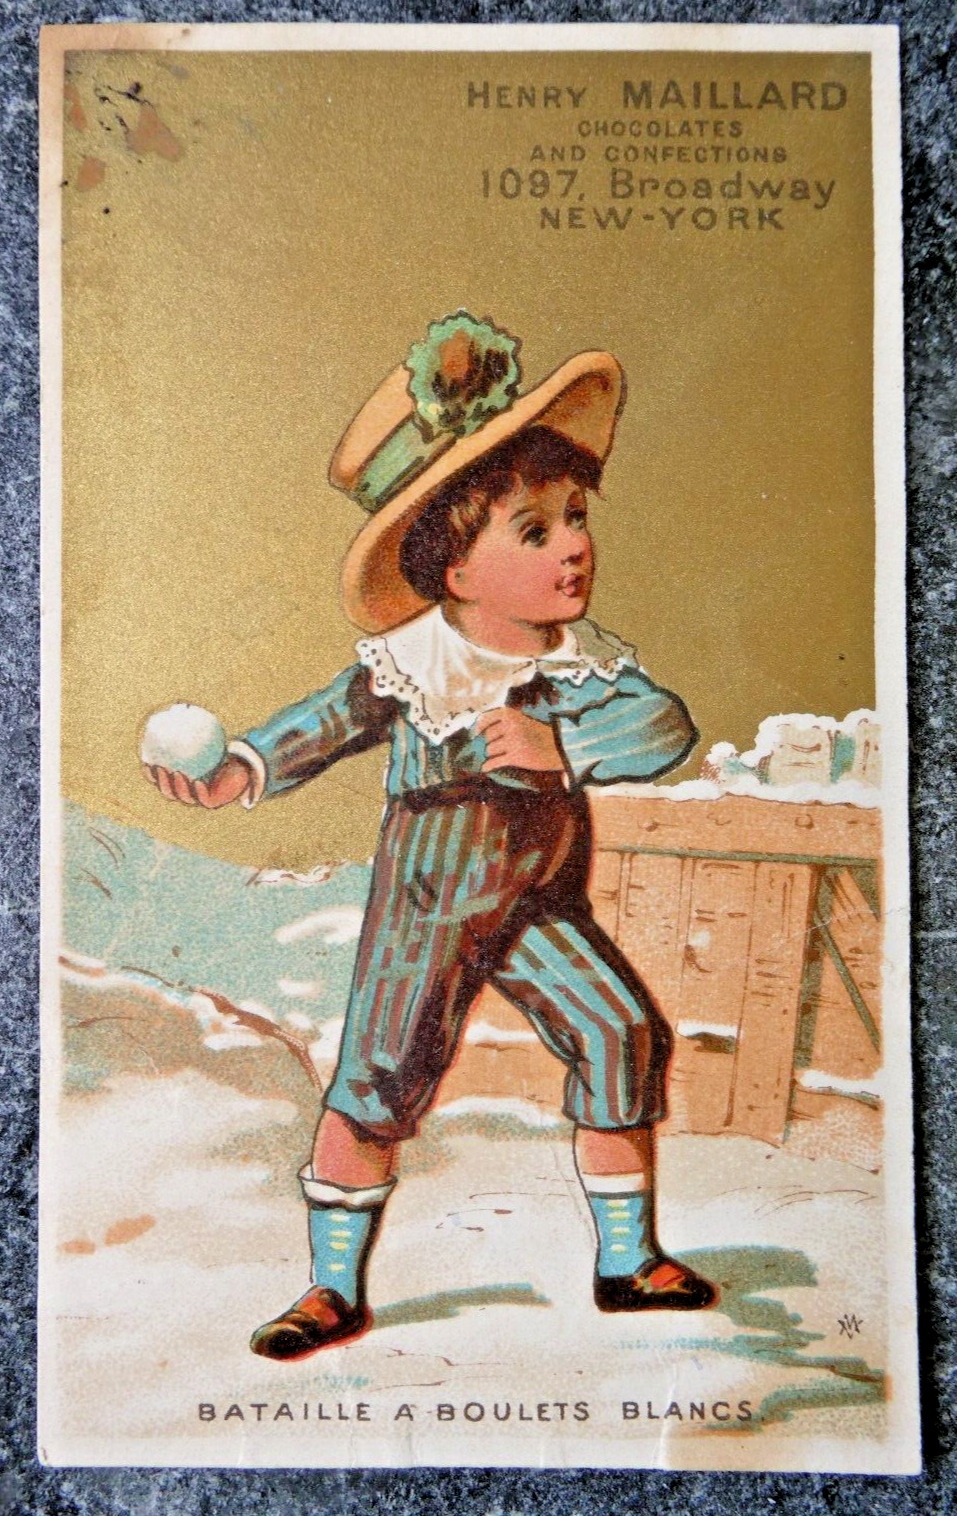 Antique Trade Card Henry Maillard Chocolates & Confections Broadway NY